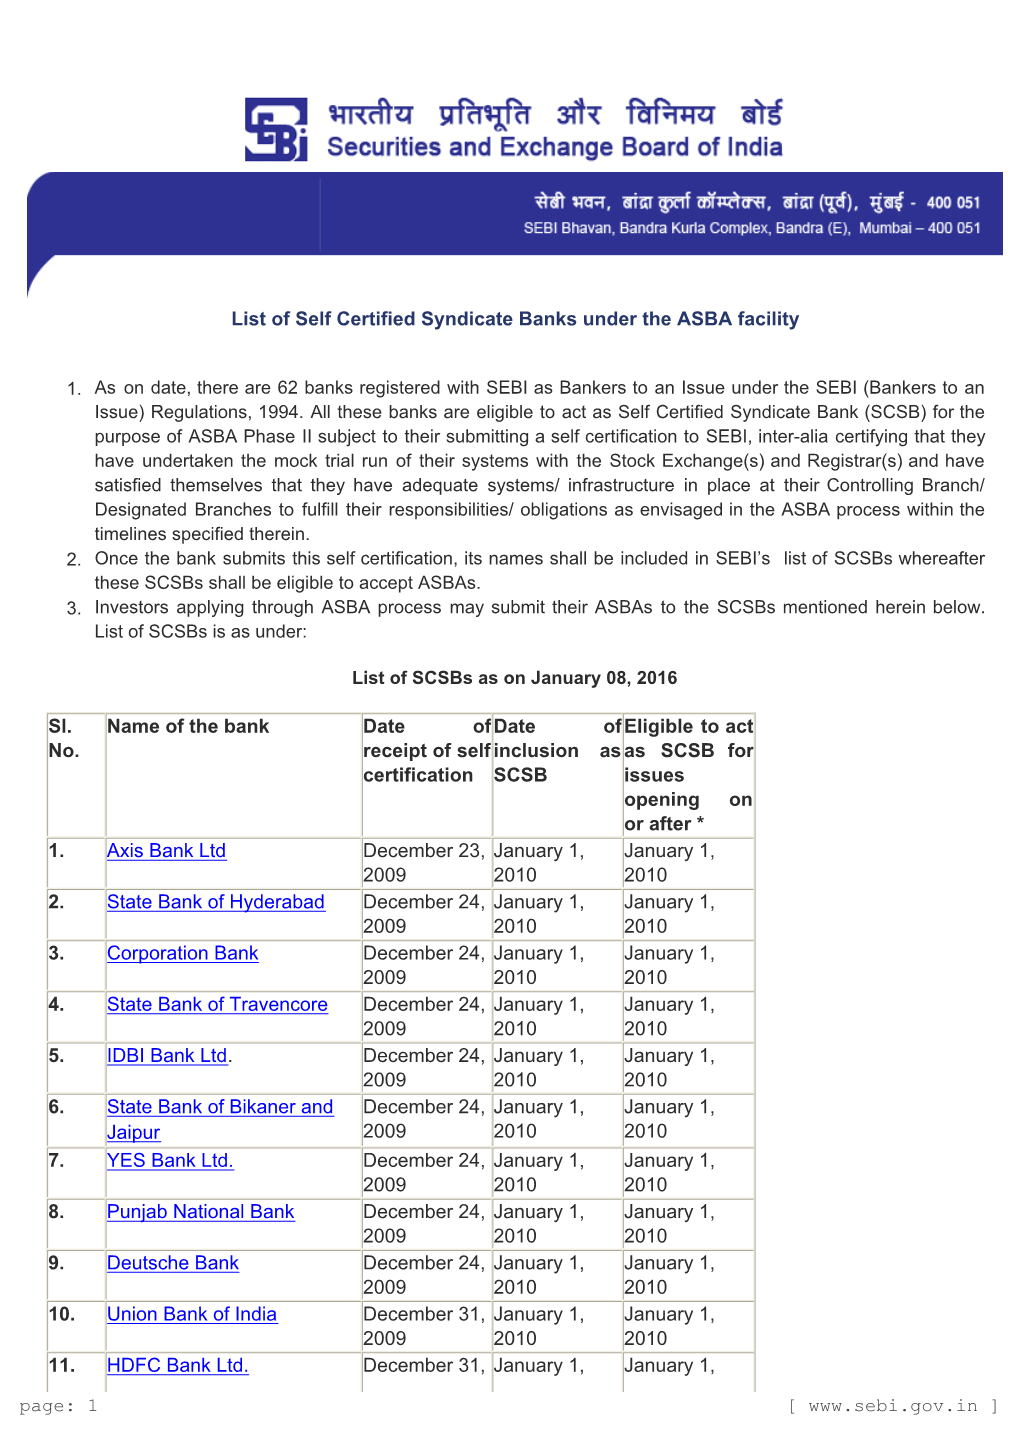 List of Self Certified Syndicate Banks Under the ASBA Facility Sl. No